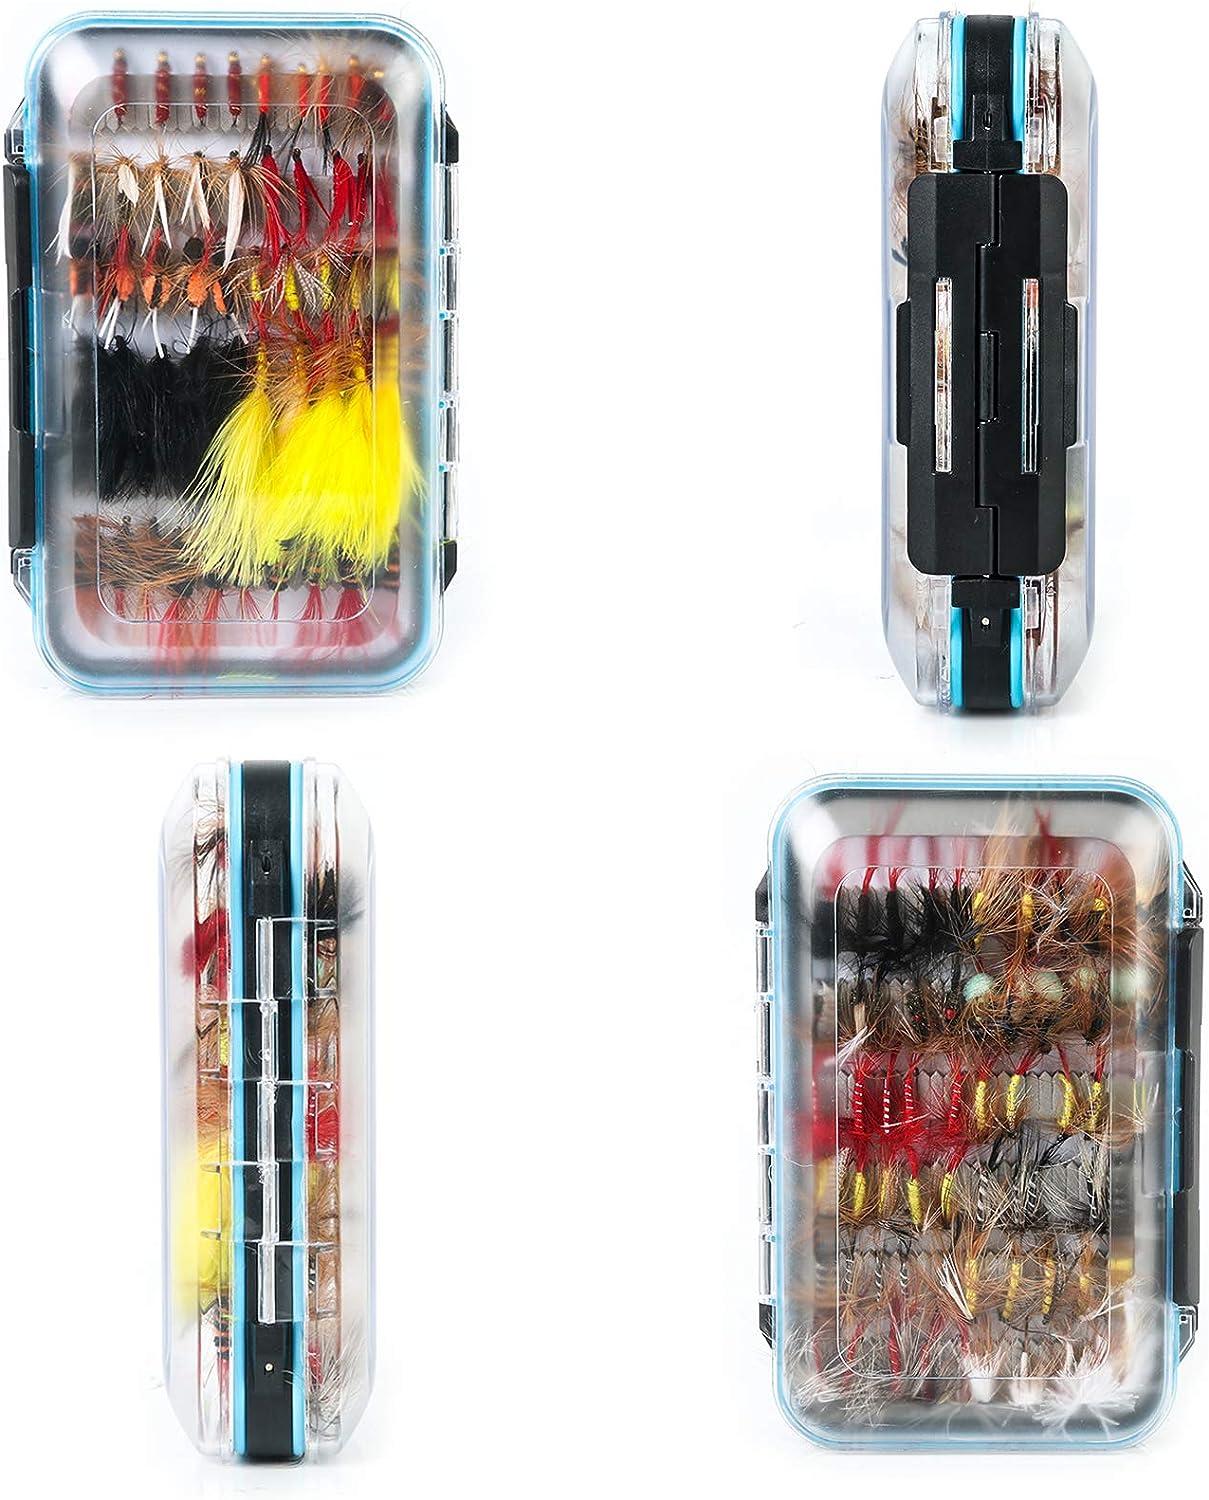 M MAXIMUMCATCH Maxcatch 120 pcs Fly Fishing Flies Kit Handmade Assortment  Dry/Wet Flies, Nymphs, Streamers with Fly Box Included Flies Assortment 120  flies with fly box